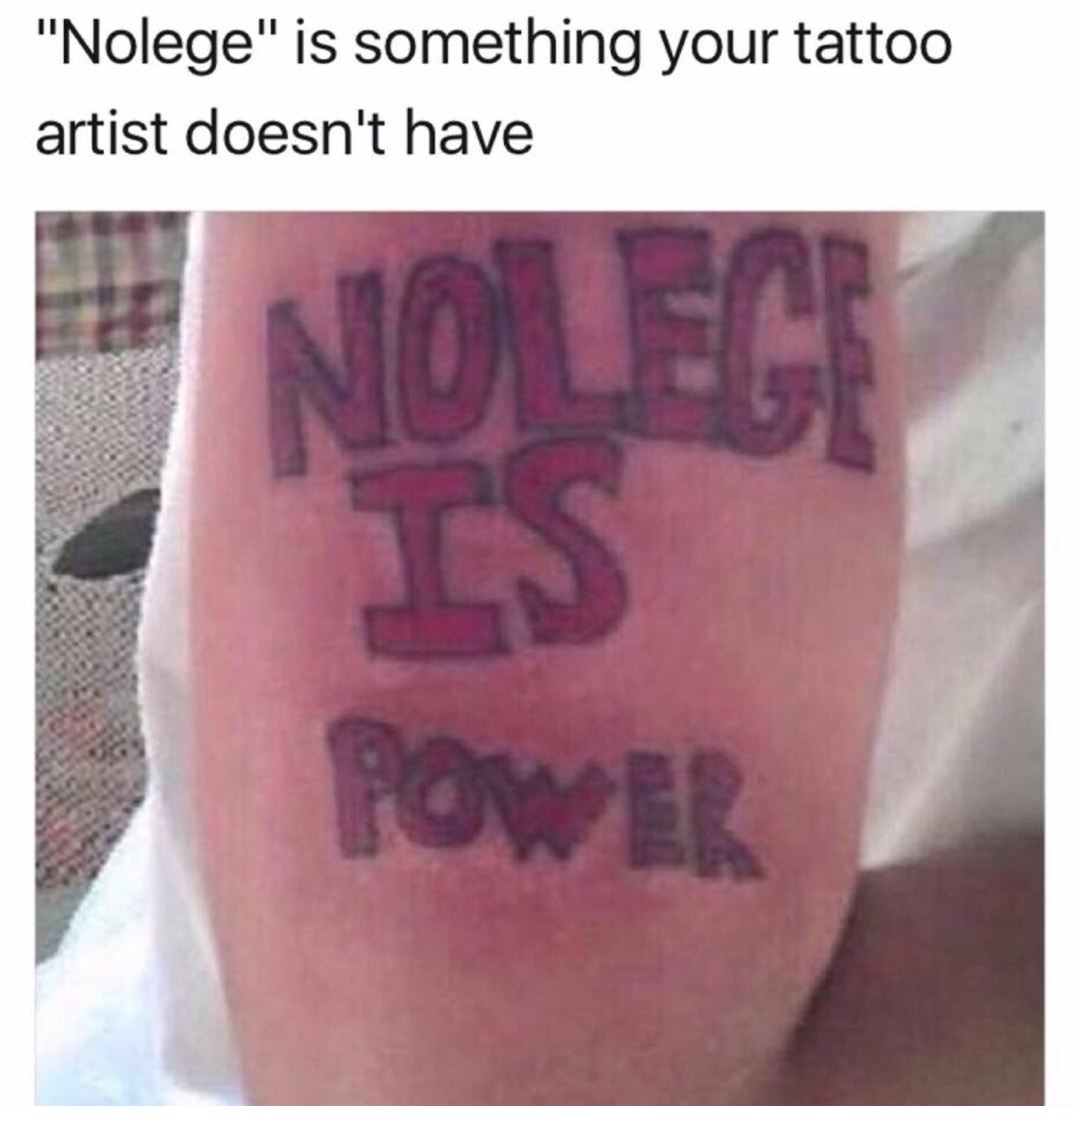 nolege is power tattoo - "Nolege" is something your tattoo artist doesn't have Power